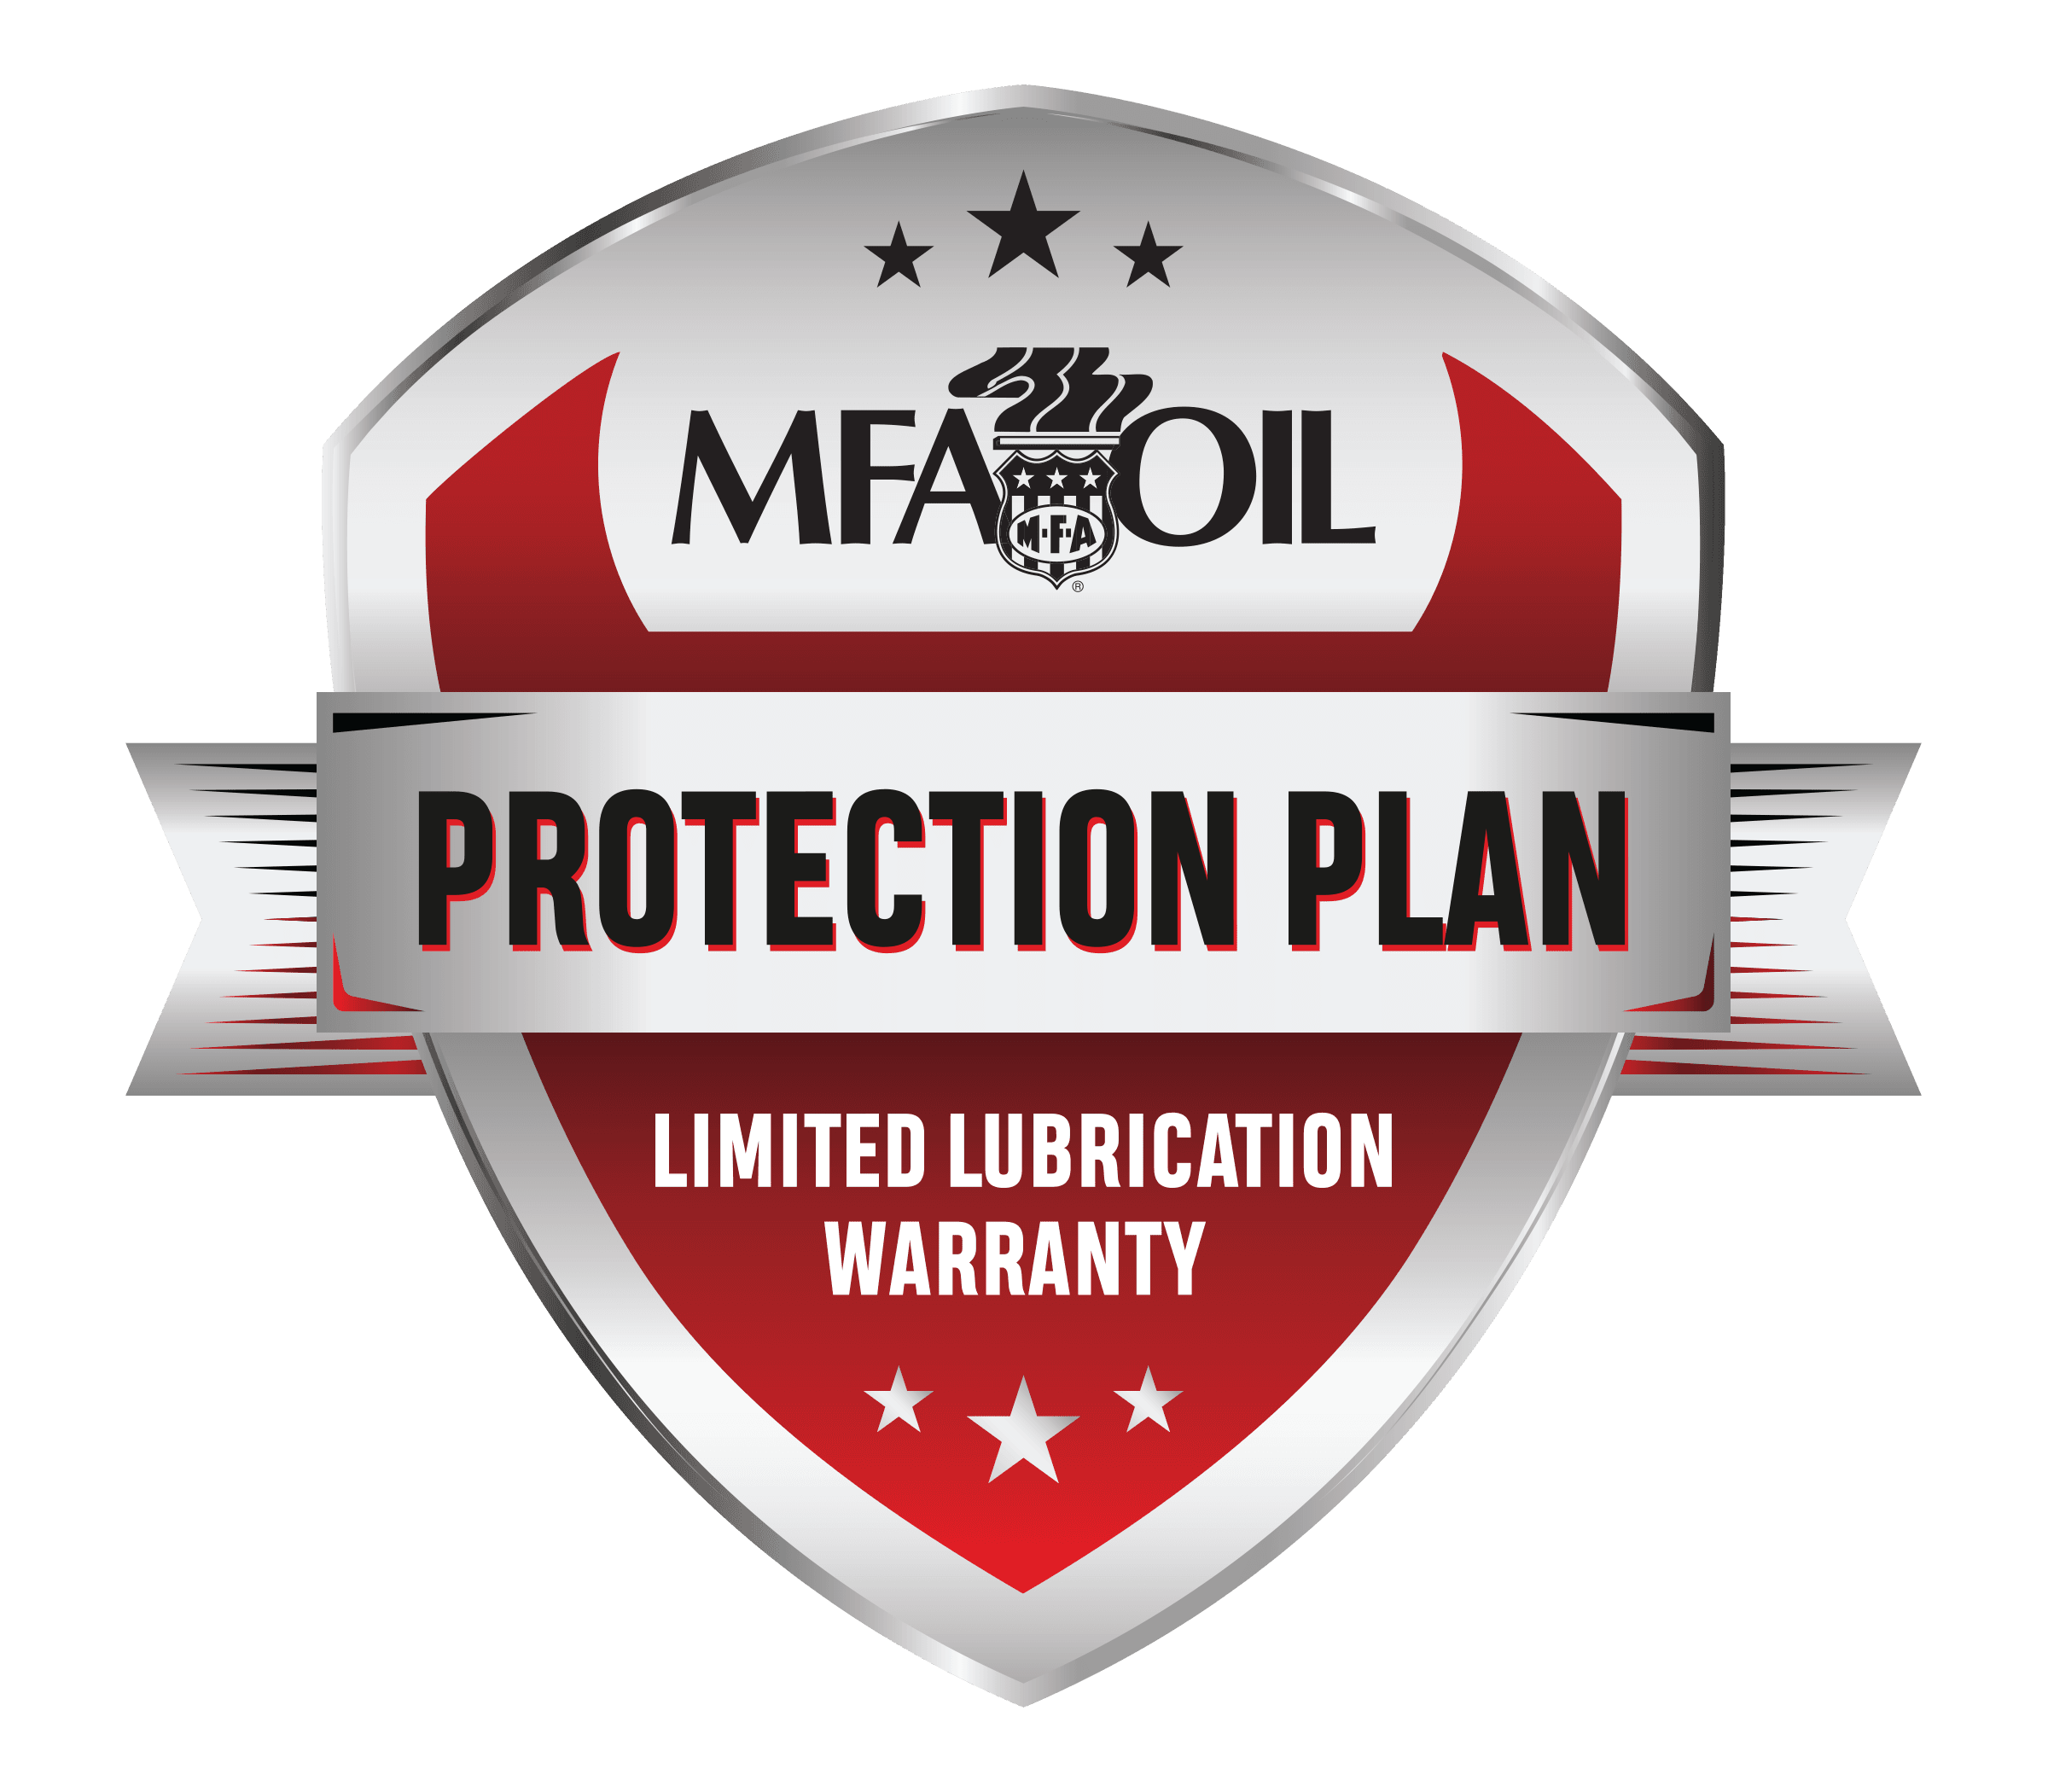 Protection Plan: Limited Lubrication Warranty